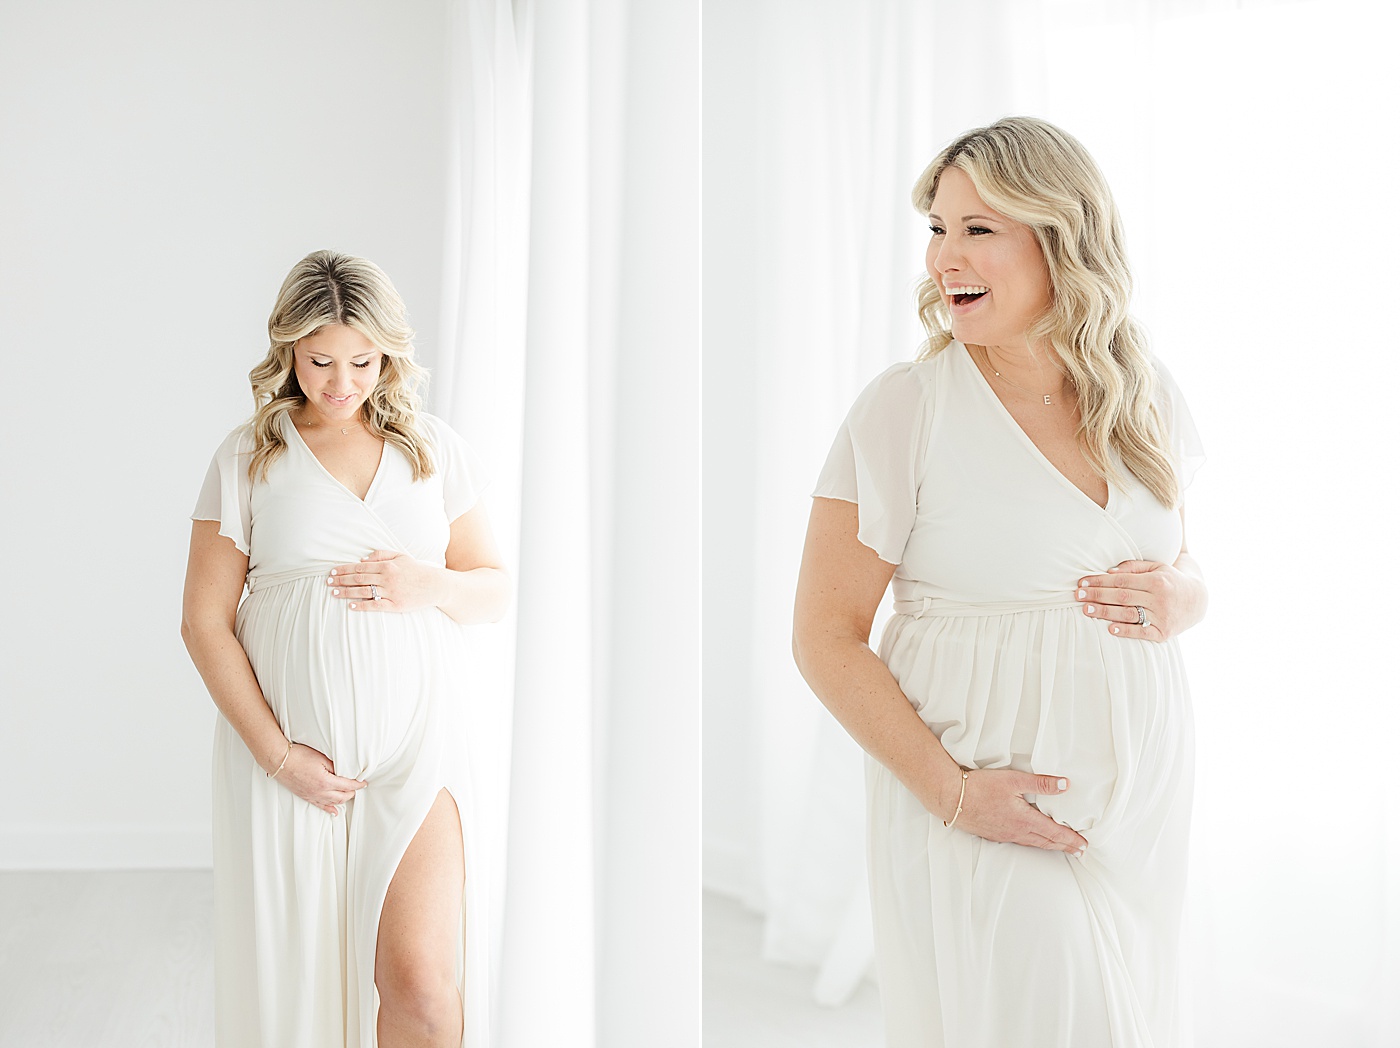 Studio maternity session for expecting mom in Westport, CT | Kristin Wood Photography